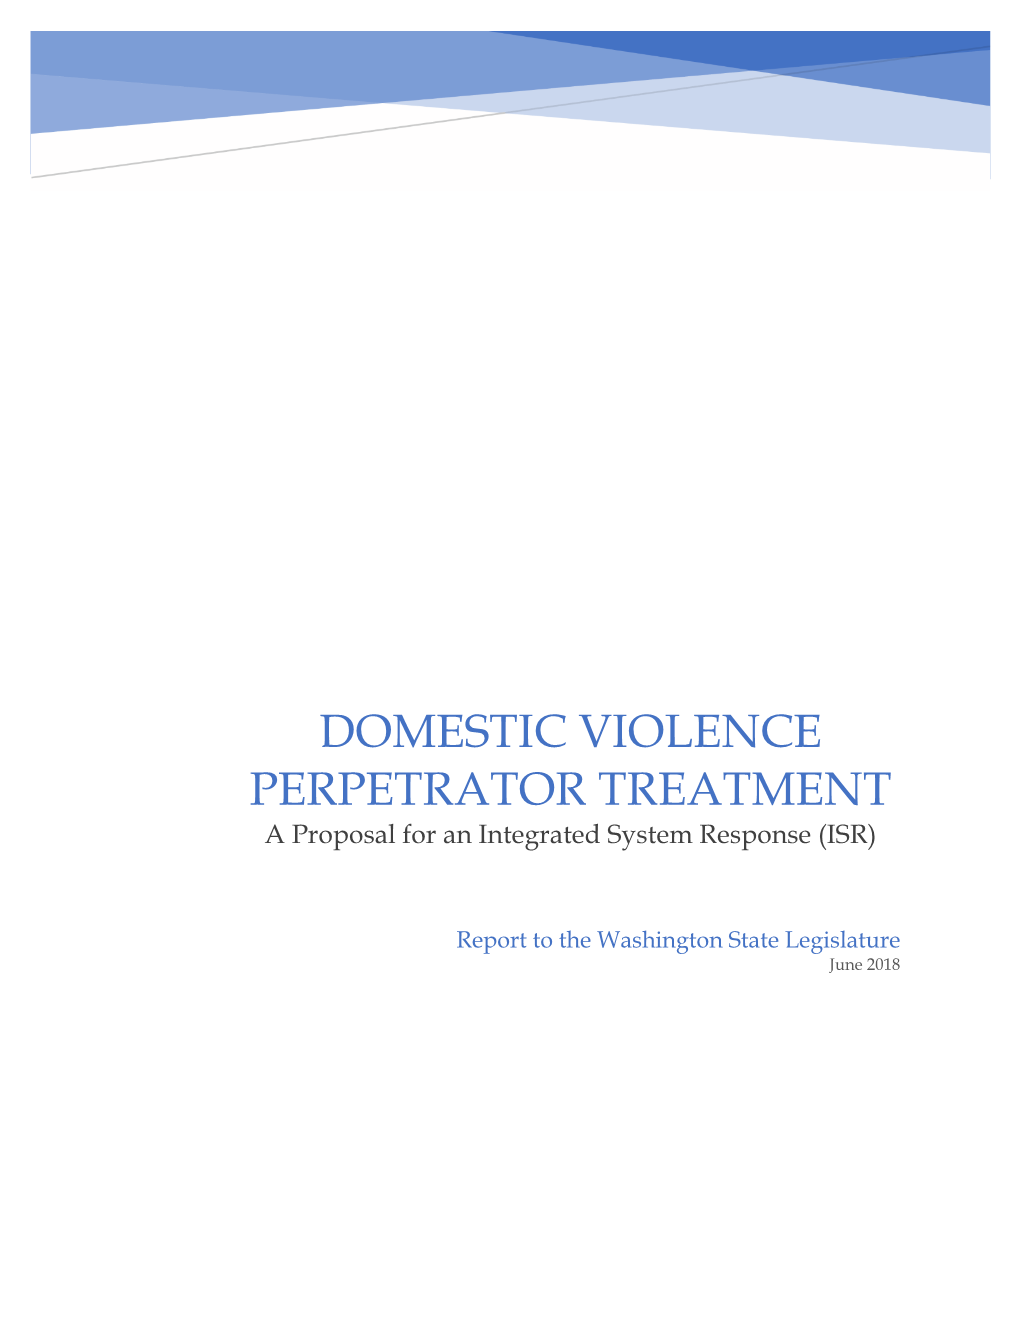 DOMESTIC VIOLENCE PERPETRATOR TREATMENT a Proposal for an Integrated System Response (ISR)